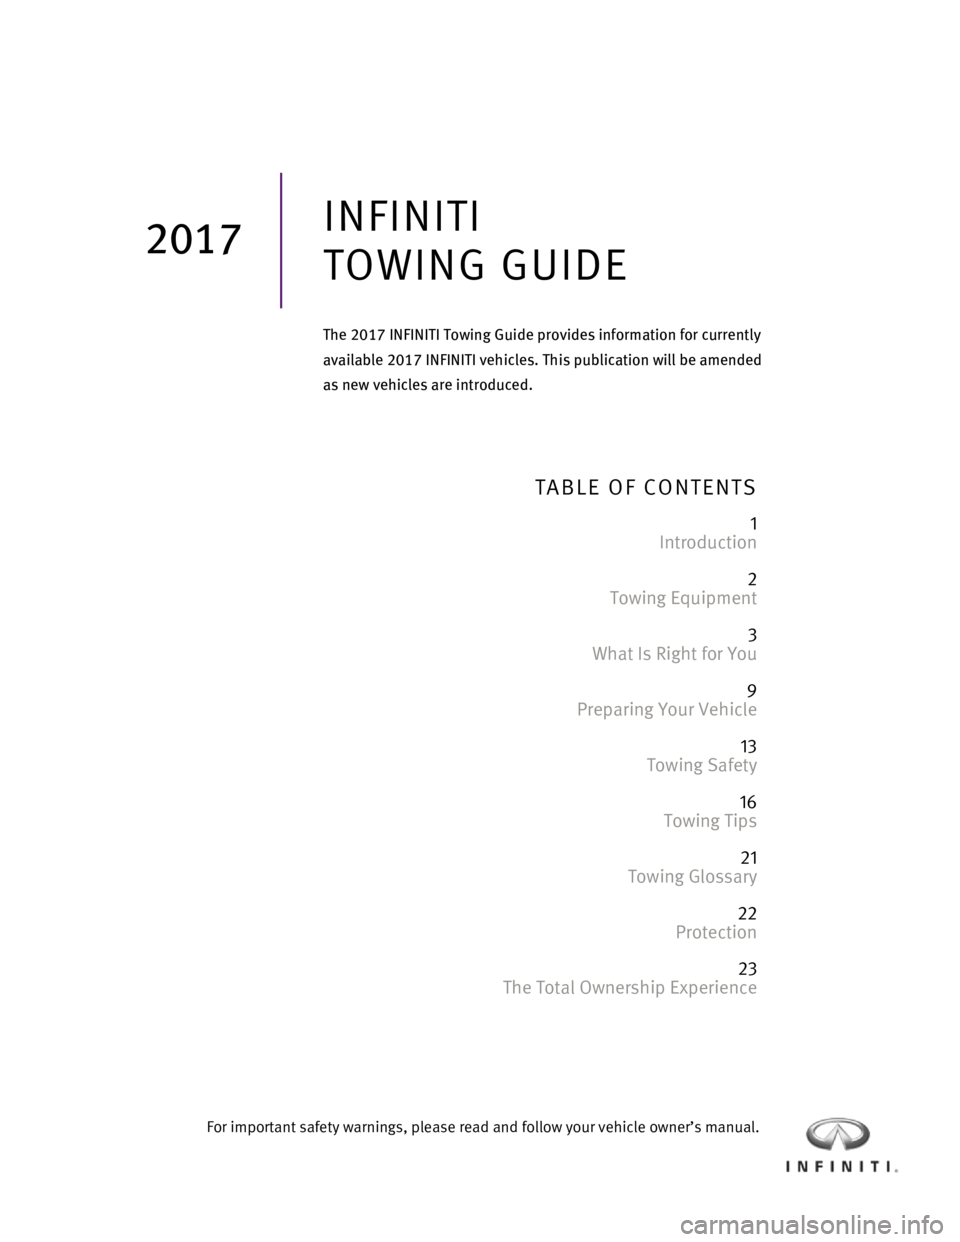 INFINITI QX30 2017  Towing Guide   
 
 
 
 
 
 
 
 
 
TABLE OF CONTENTS  
 
1 
Introduction 
 
2 
Towing Equipment 
 
3 
What Is Right for You 
 
9 
Preparing Your Vehicle 
 
13 
Towing Safety 
 
16 
Towing Tips 
 
21 
Towing Glossar